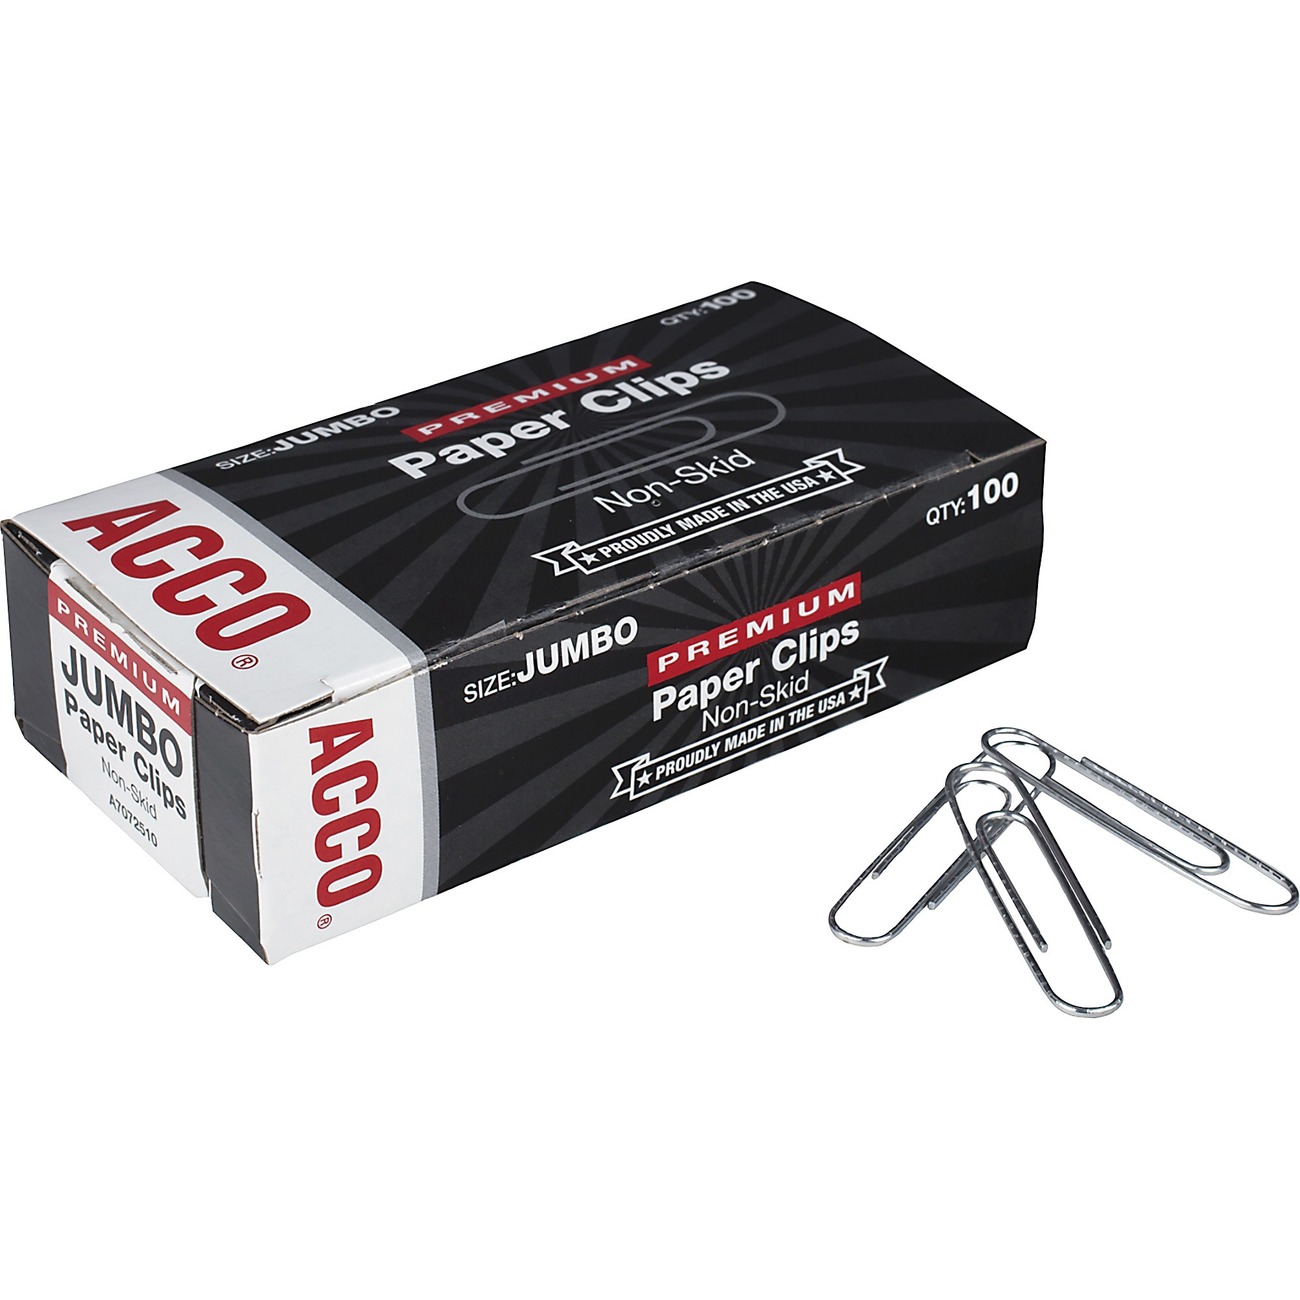 Acco Premium Jumbo Non Skid Paper Clips Jd Office Products